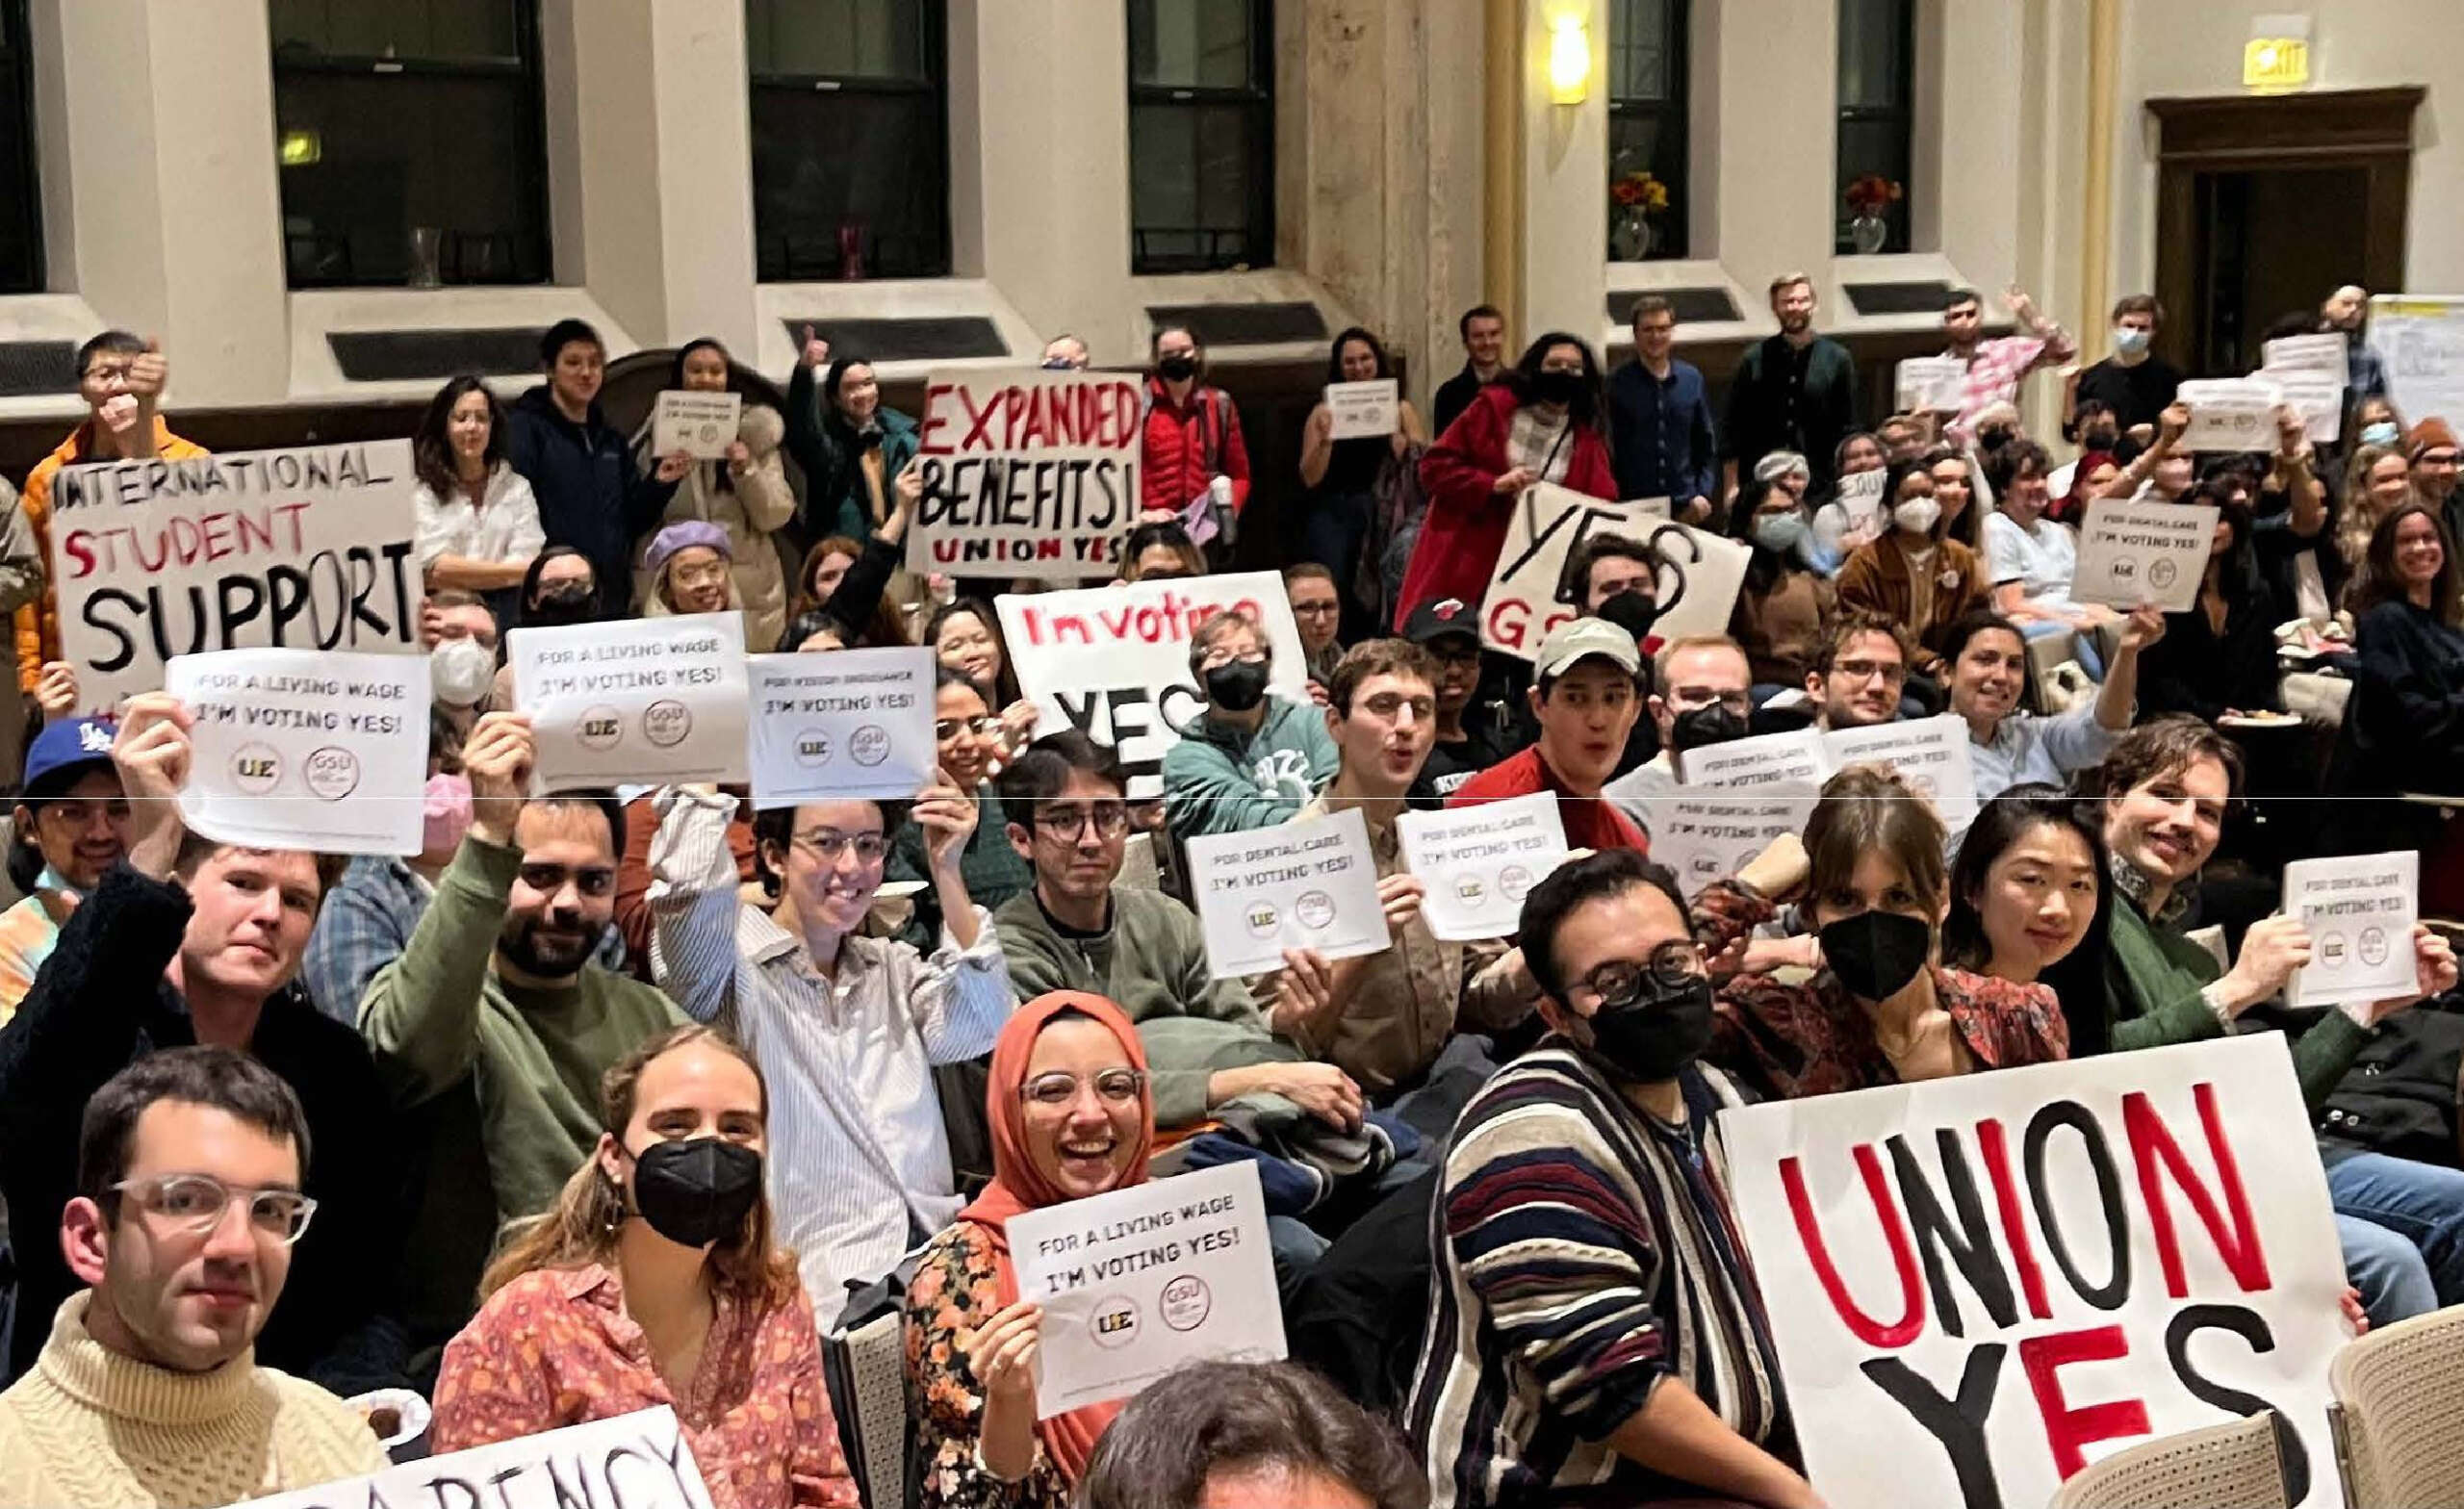 UChicago Grad Students Fought for a Union for 15 Years. Now They May